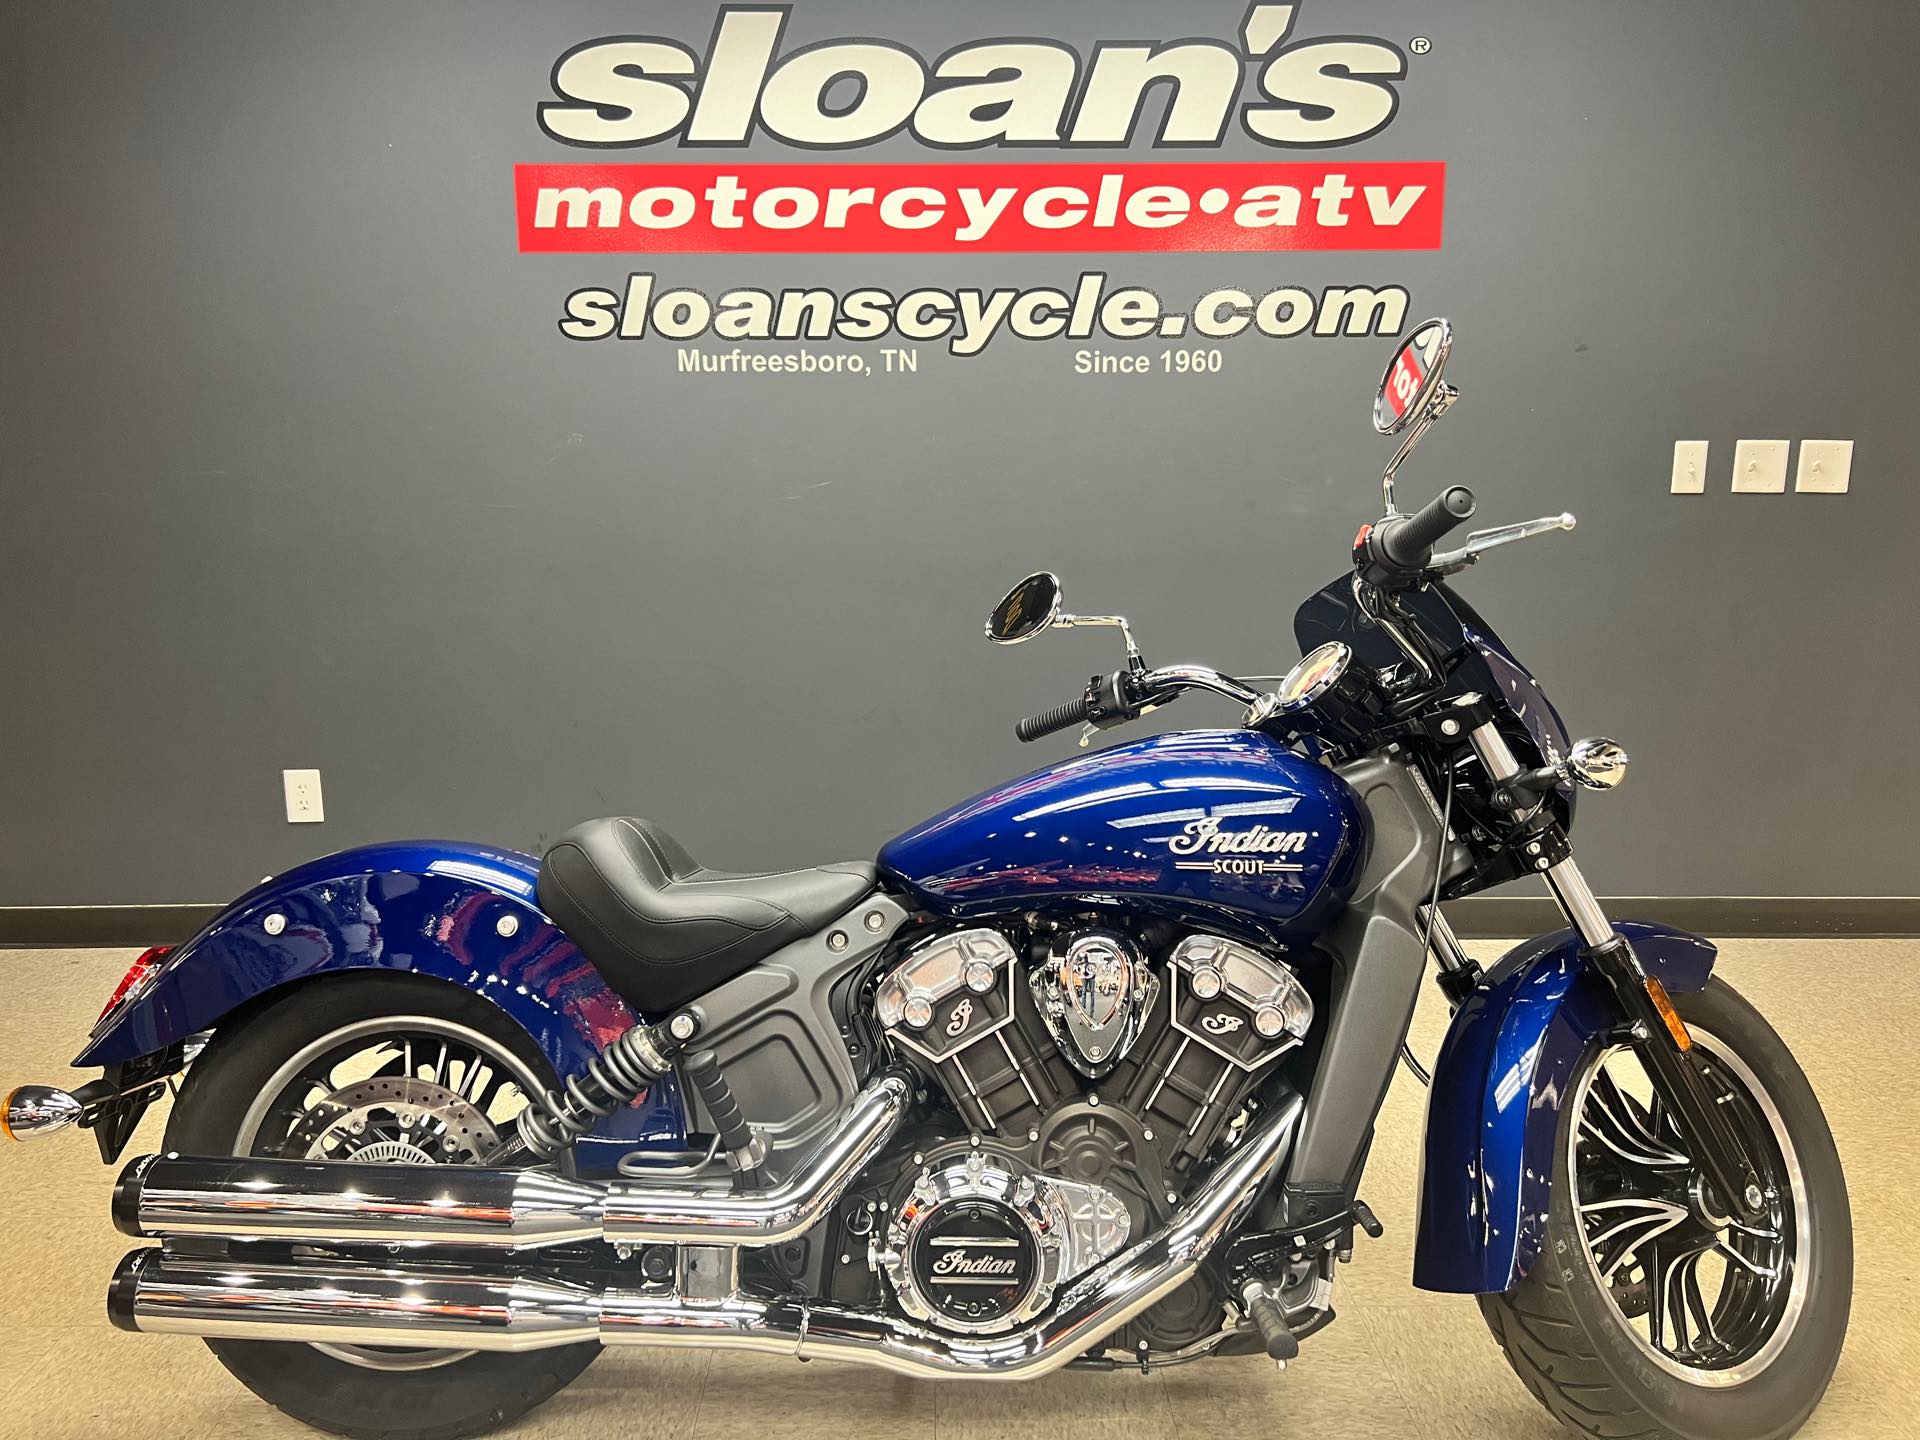 2020 Indian Motorcycle Scout - ABS at Sloans Motorcycle ATV, Murfreesboro, TN, 37129